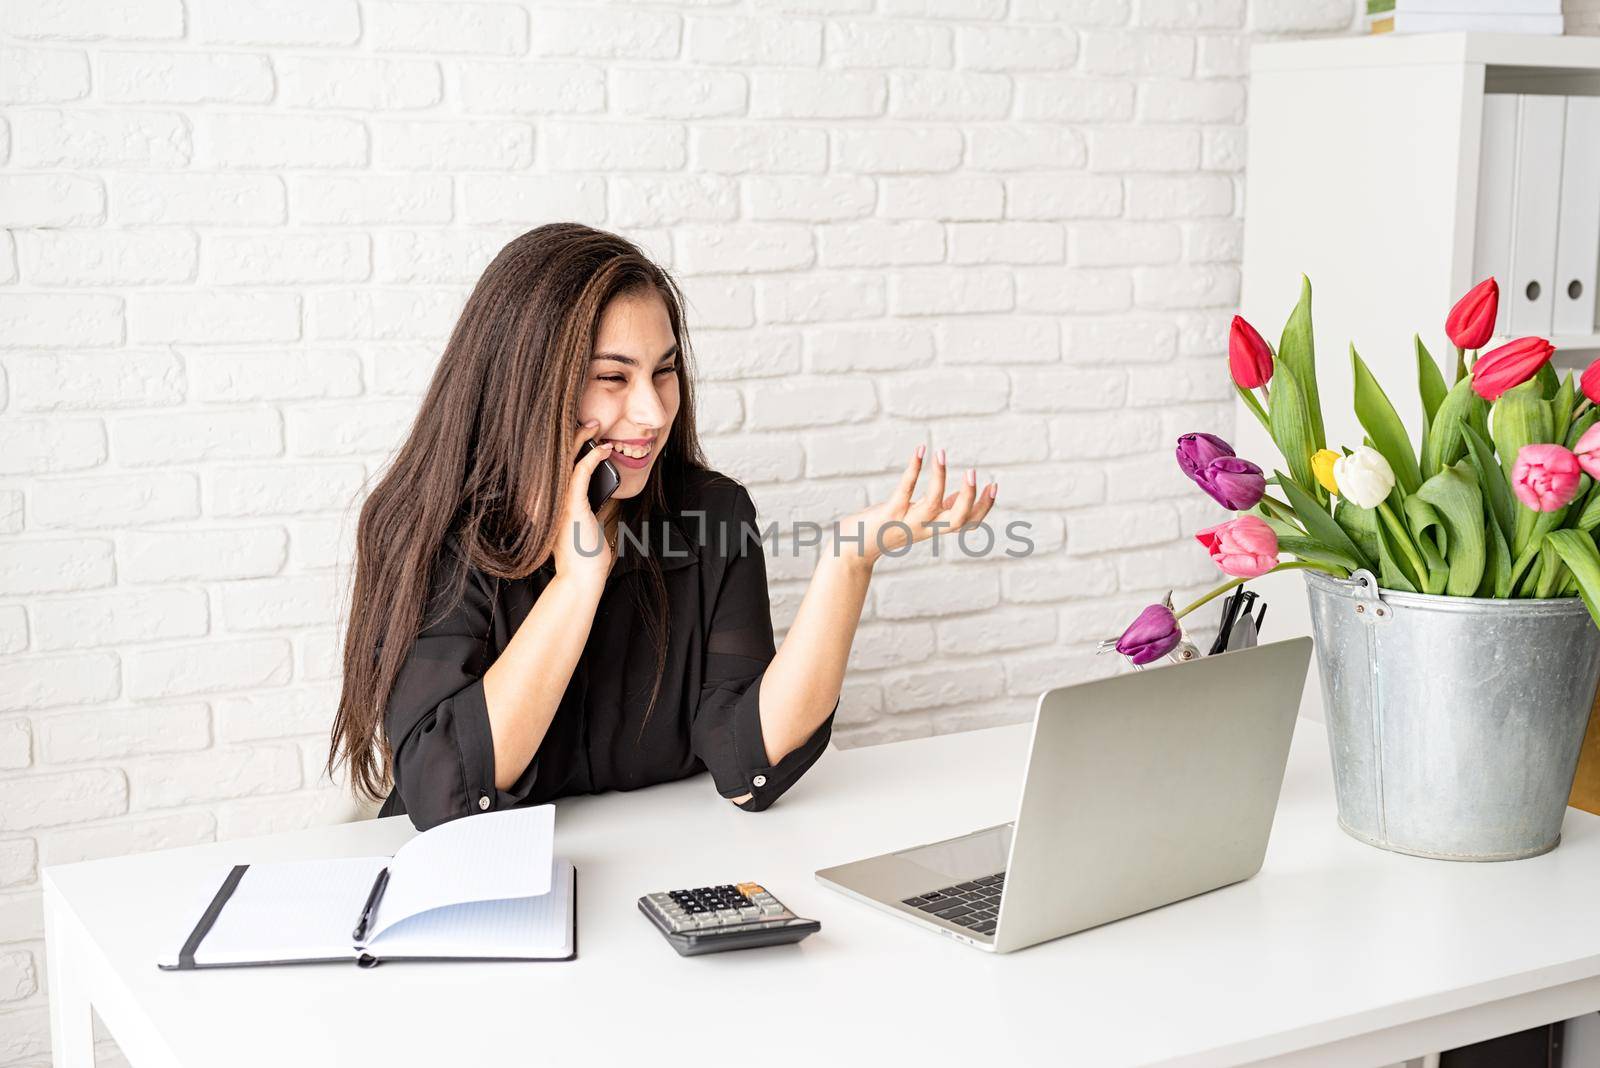 Small business concept. Young brunette business woman florist Talking on the phone, working at the office, bucket of tulips on the desk